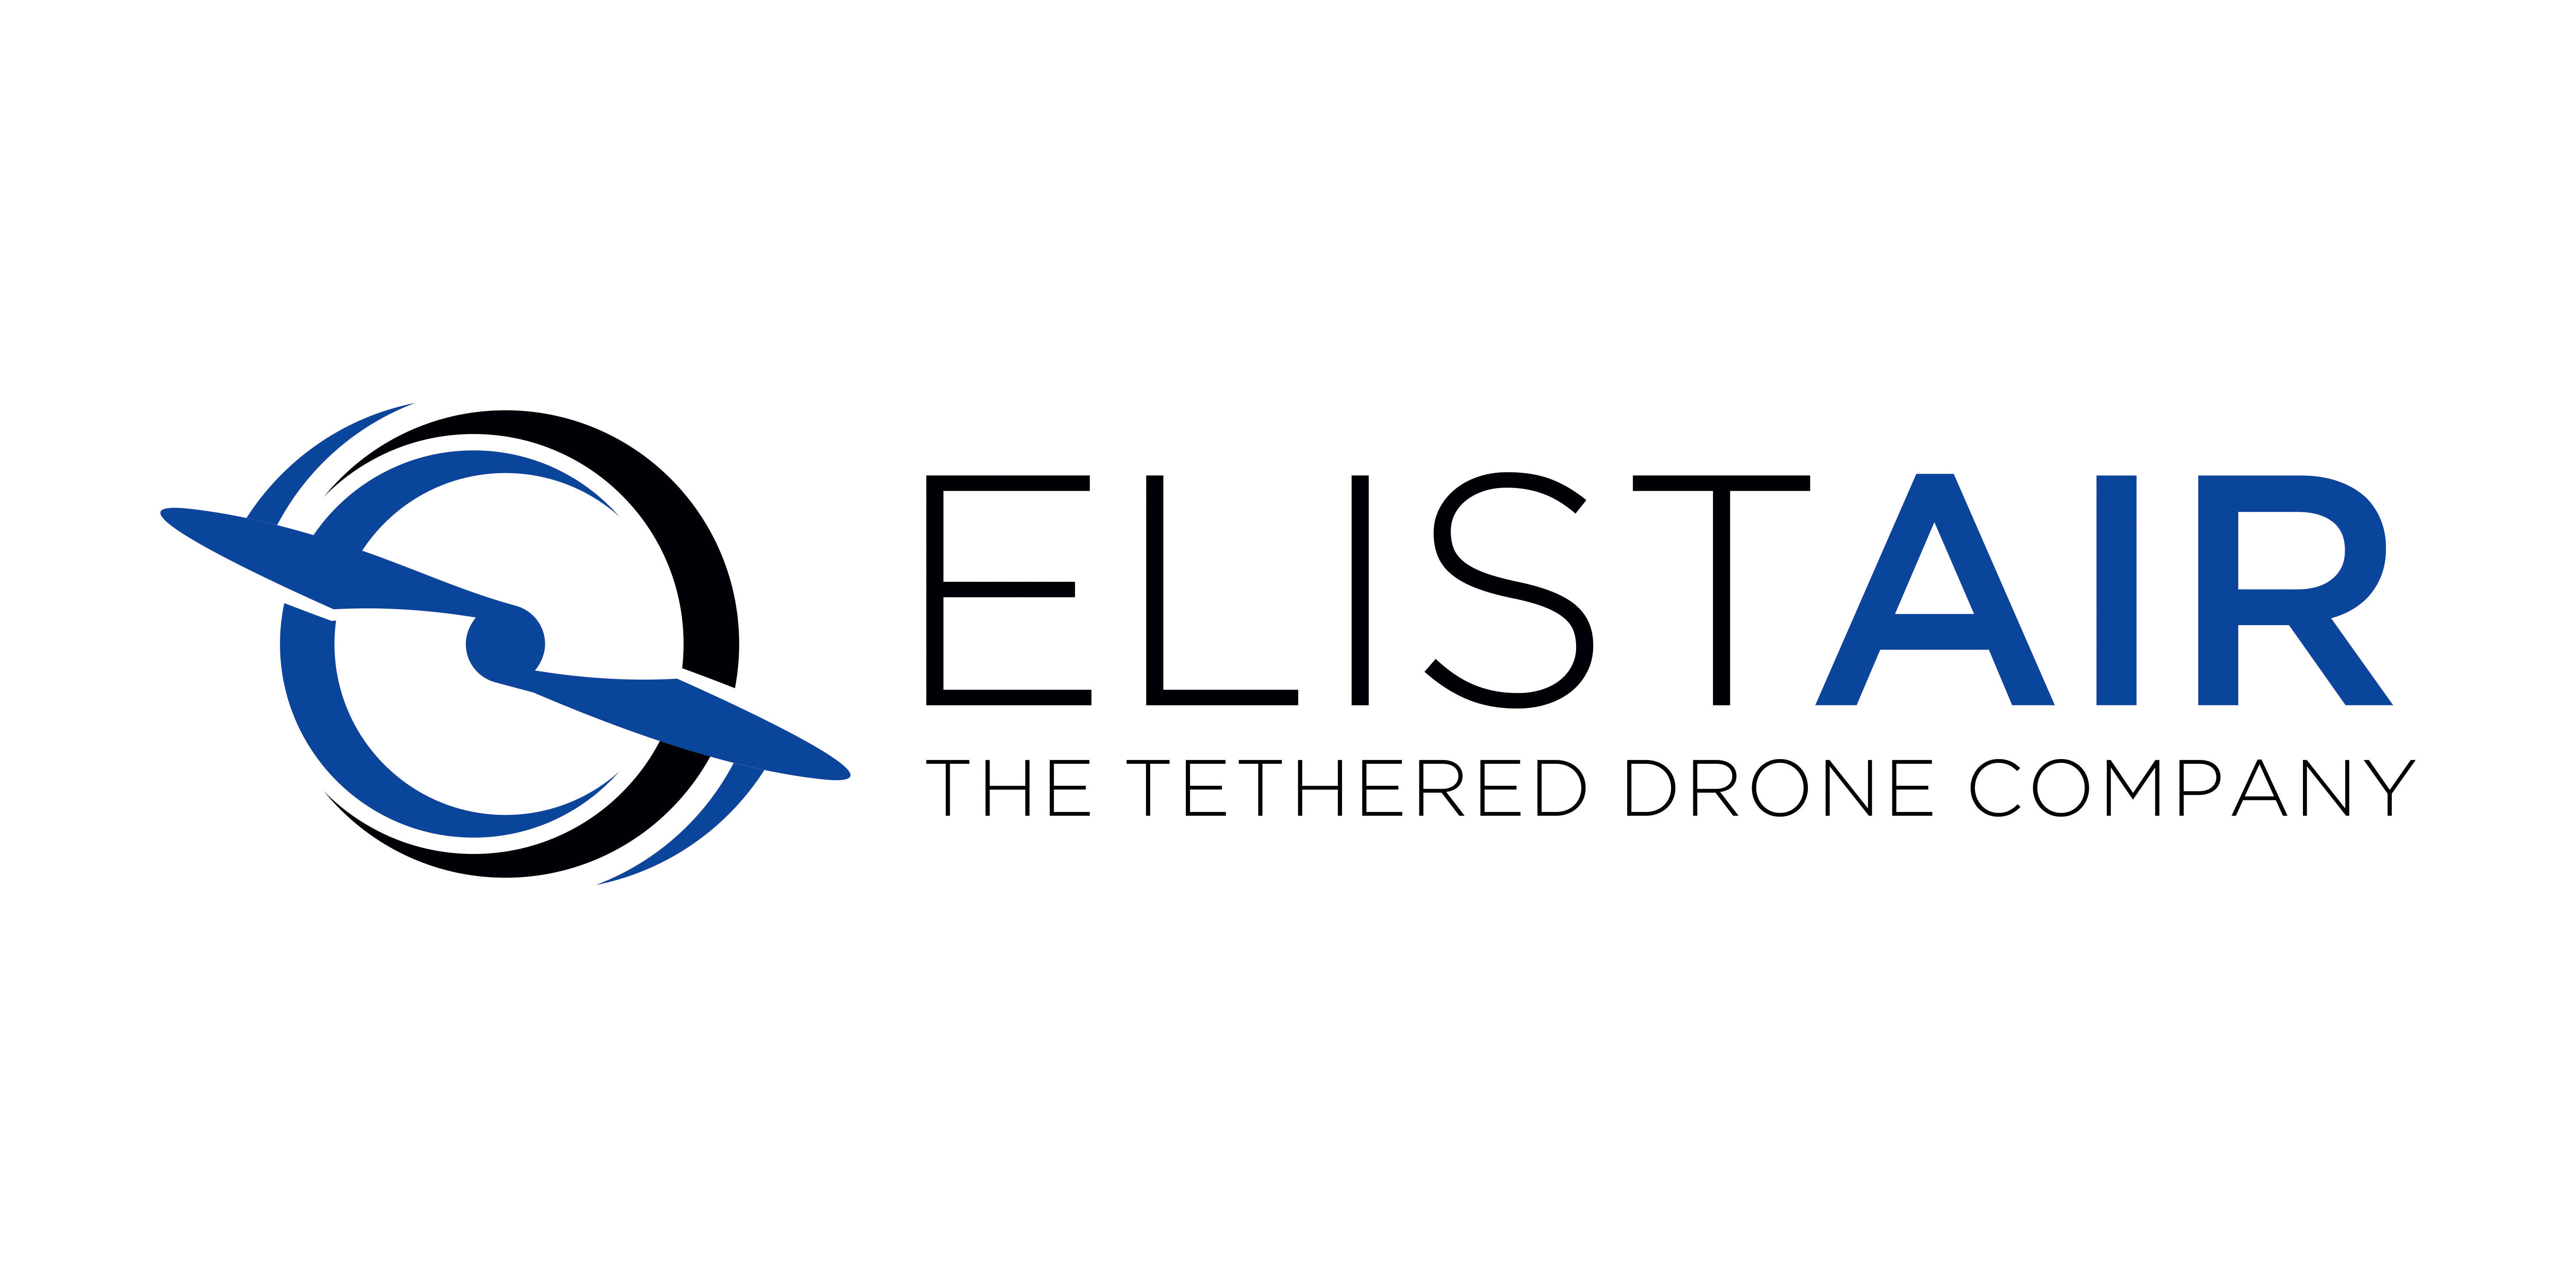 Elistair, The in Tethered UAVs, Announces a €5M Series B Round to Accelerate Its International Expansion | Business Wire